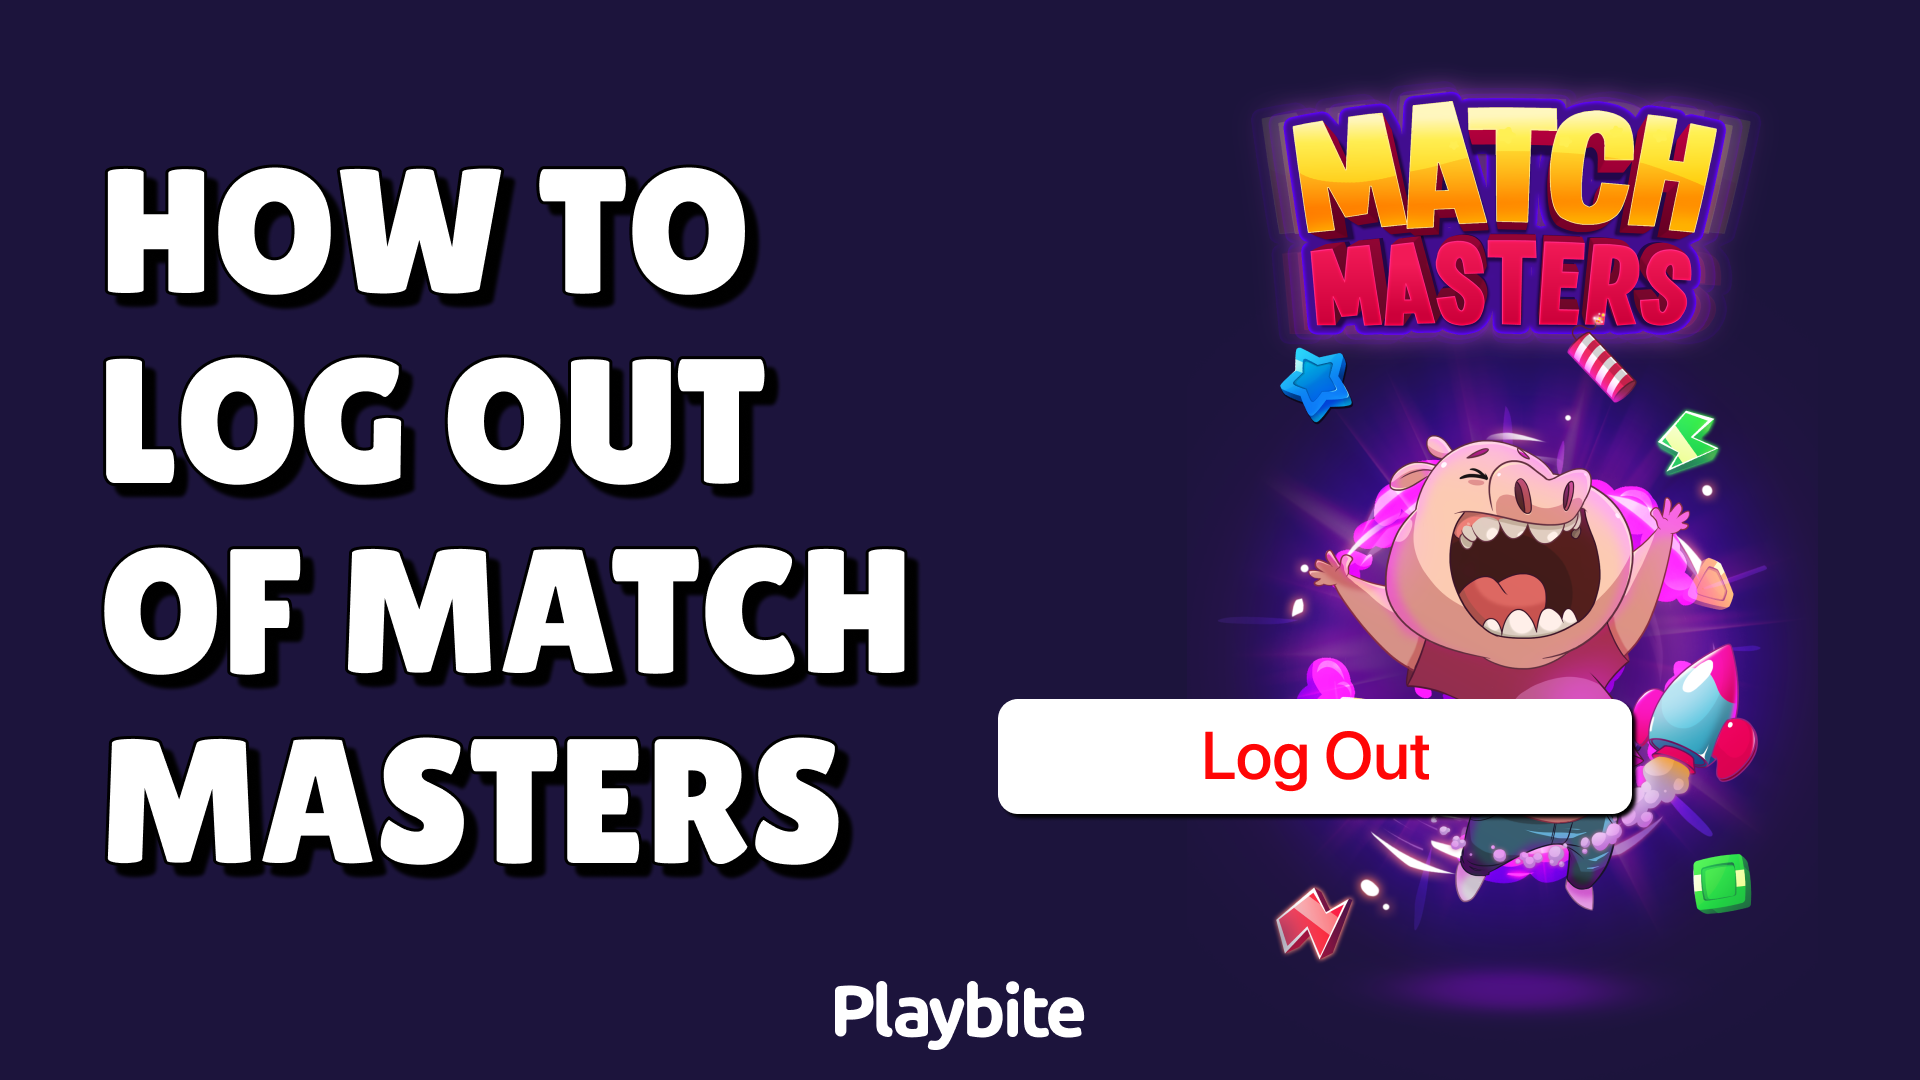 How To Log Out Of Match Masters